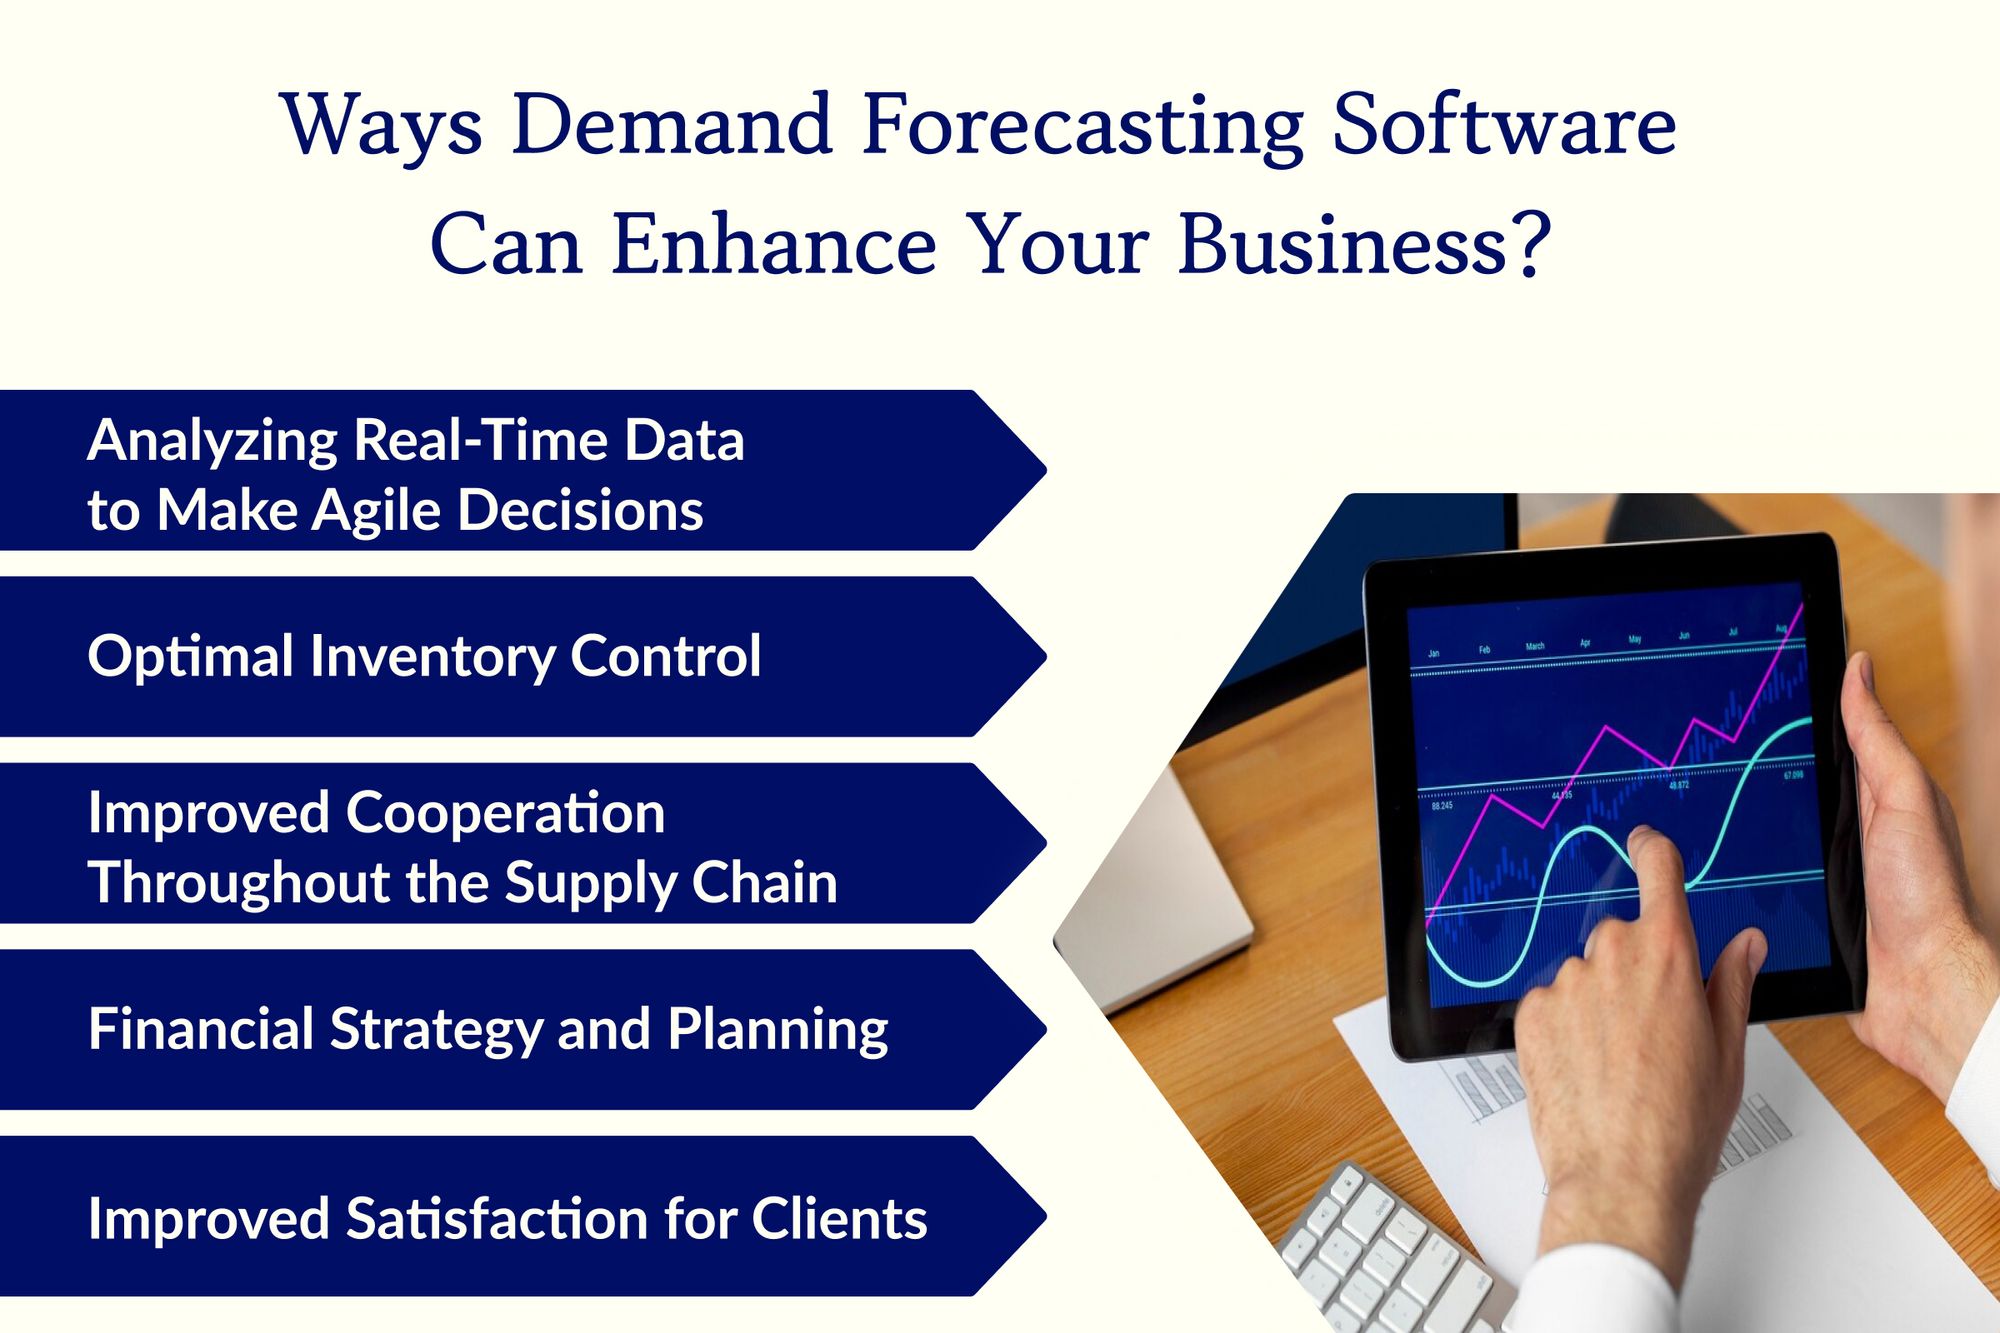 Ways Demand Forecasting Software Can Enhance Your Business?